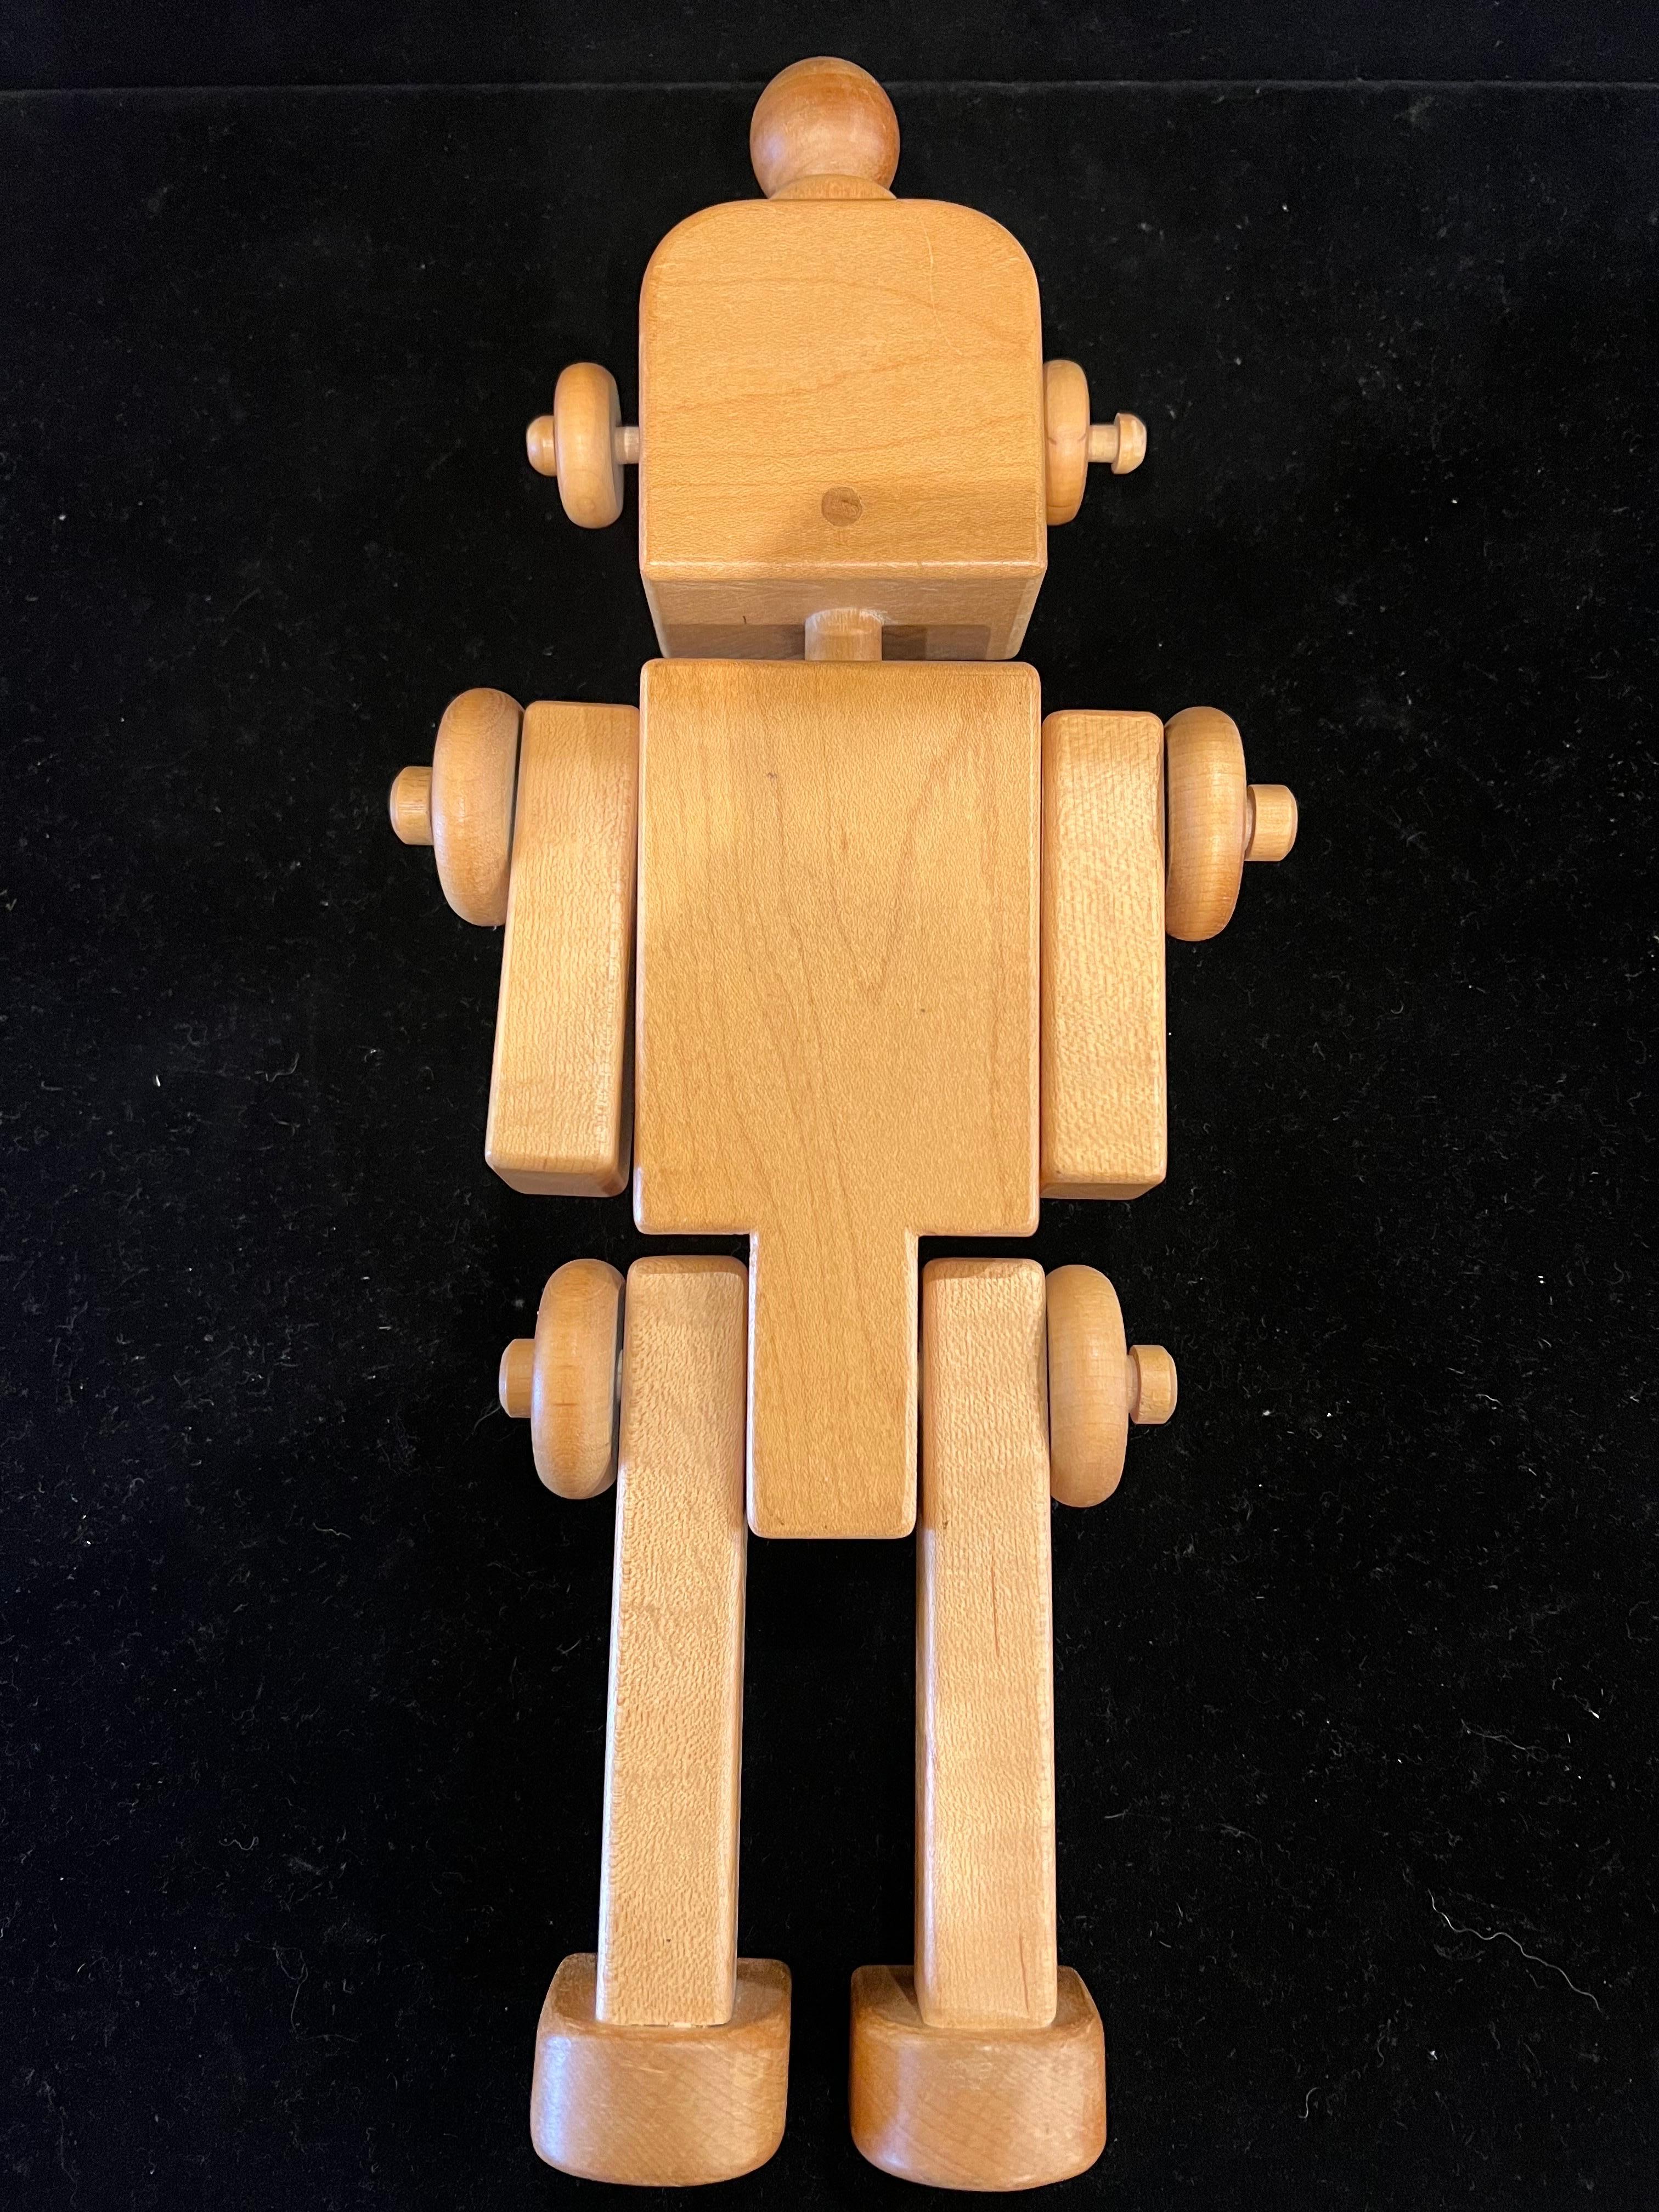 Space Age Articulated Solid Wood Robot Toy Midcentury